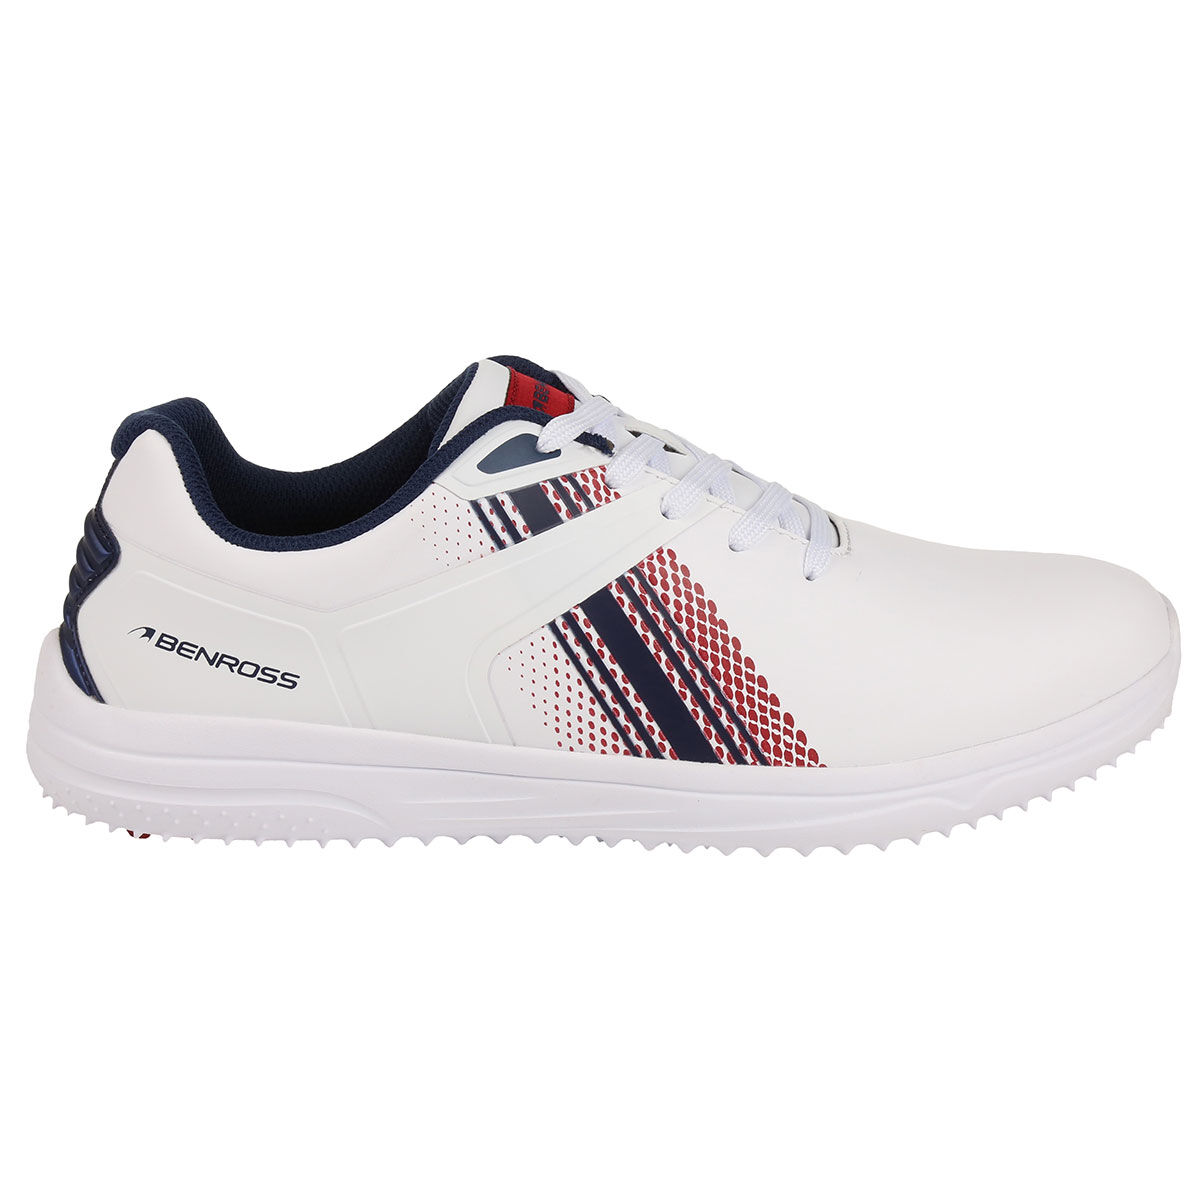 Benross Men’s White, Navy Blue and Red Stylish Stripe Dynamo Waterproof Spikeless Golf Shoes, Size: 9 | American Golf